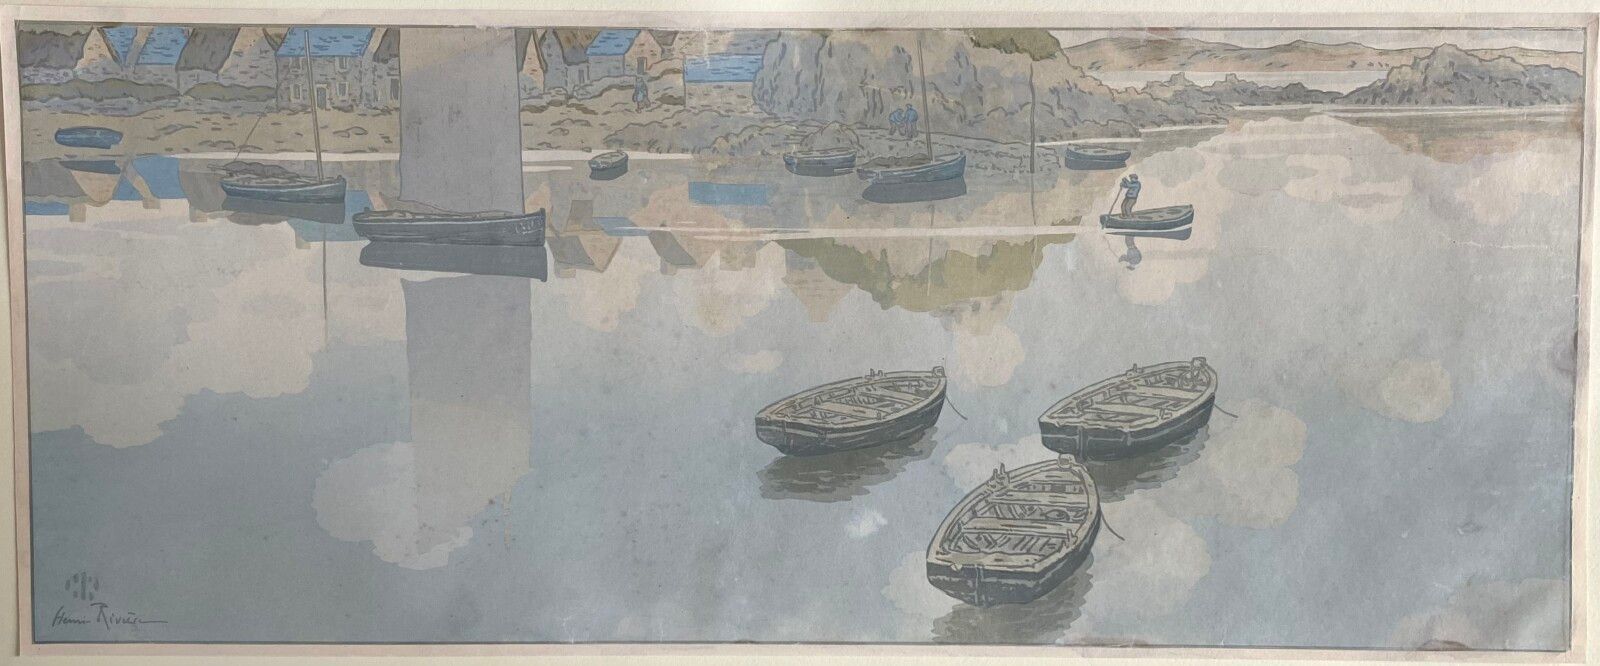 Null Henri RIVIERE (1864-1951)

Les reflets, plate 6, 1901 (Fields p.77)

One of&hellip;